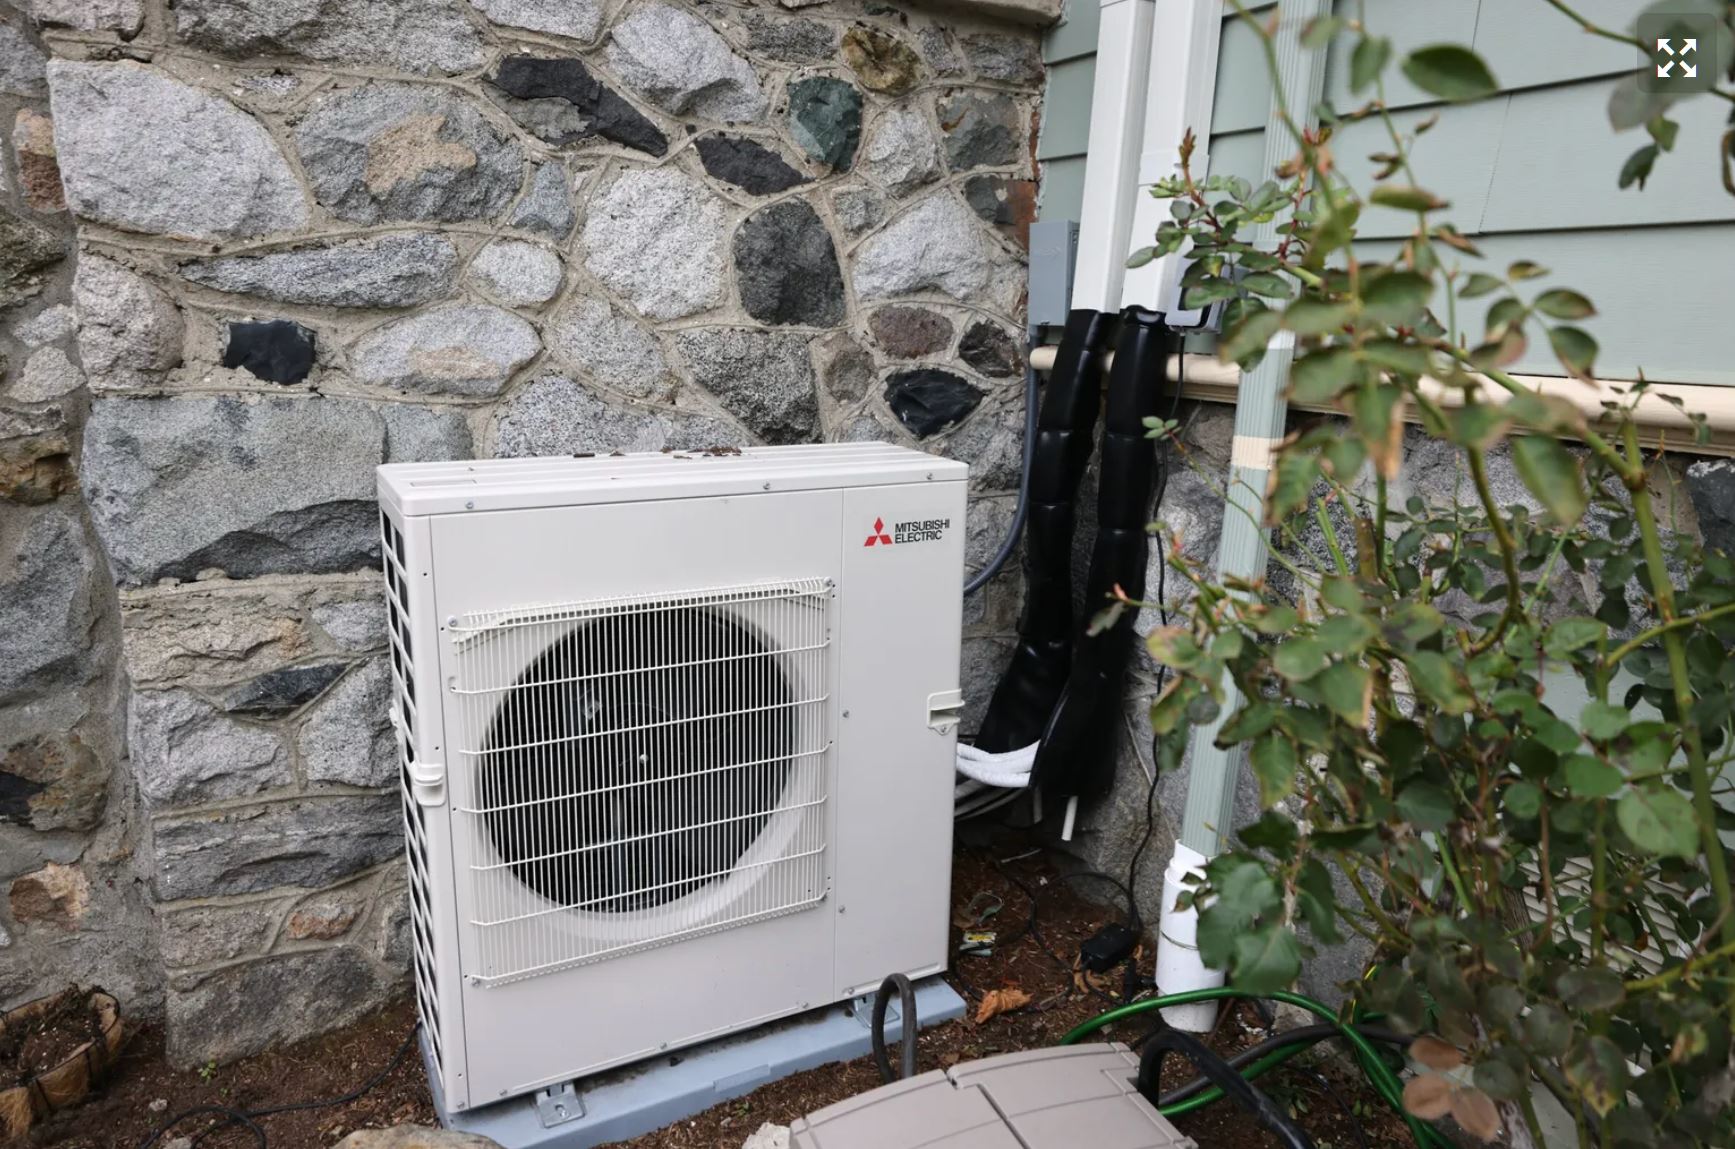 A heat pump outside a West Seattle home in February